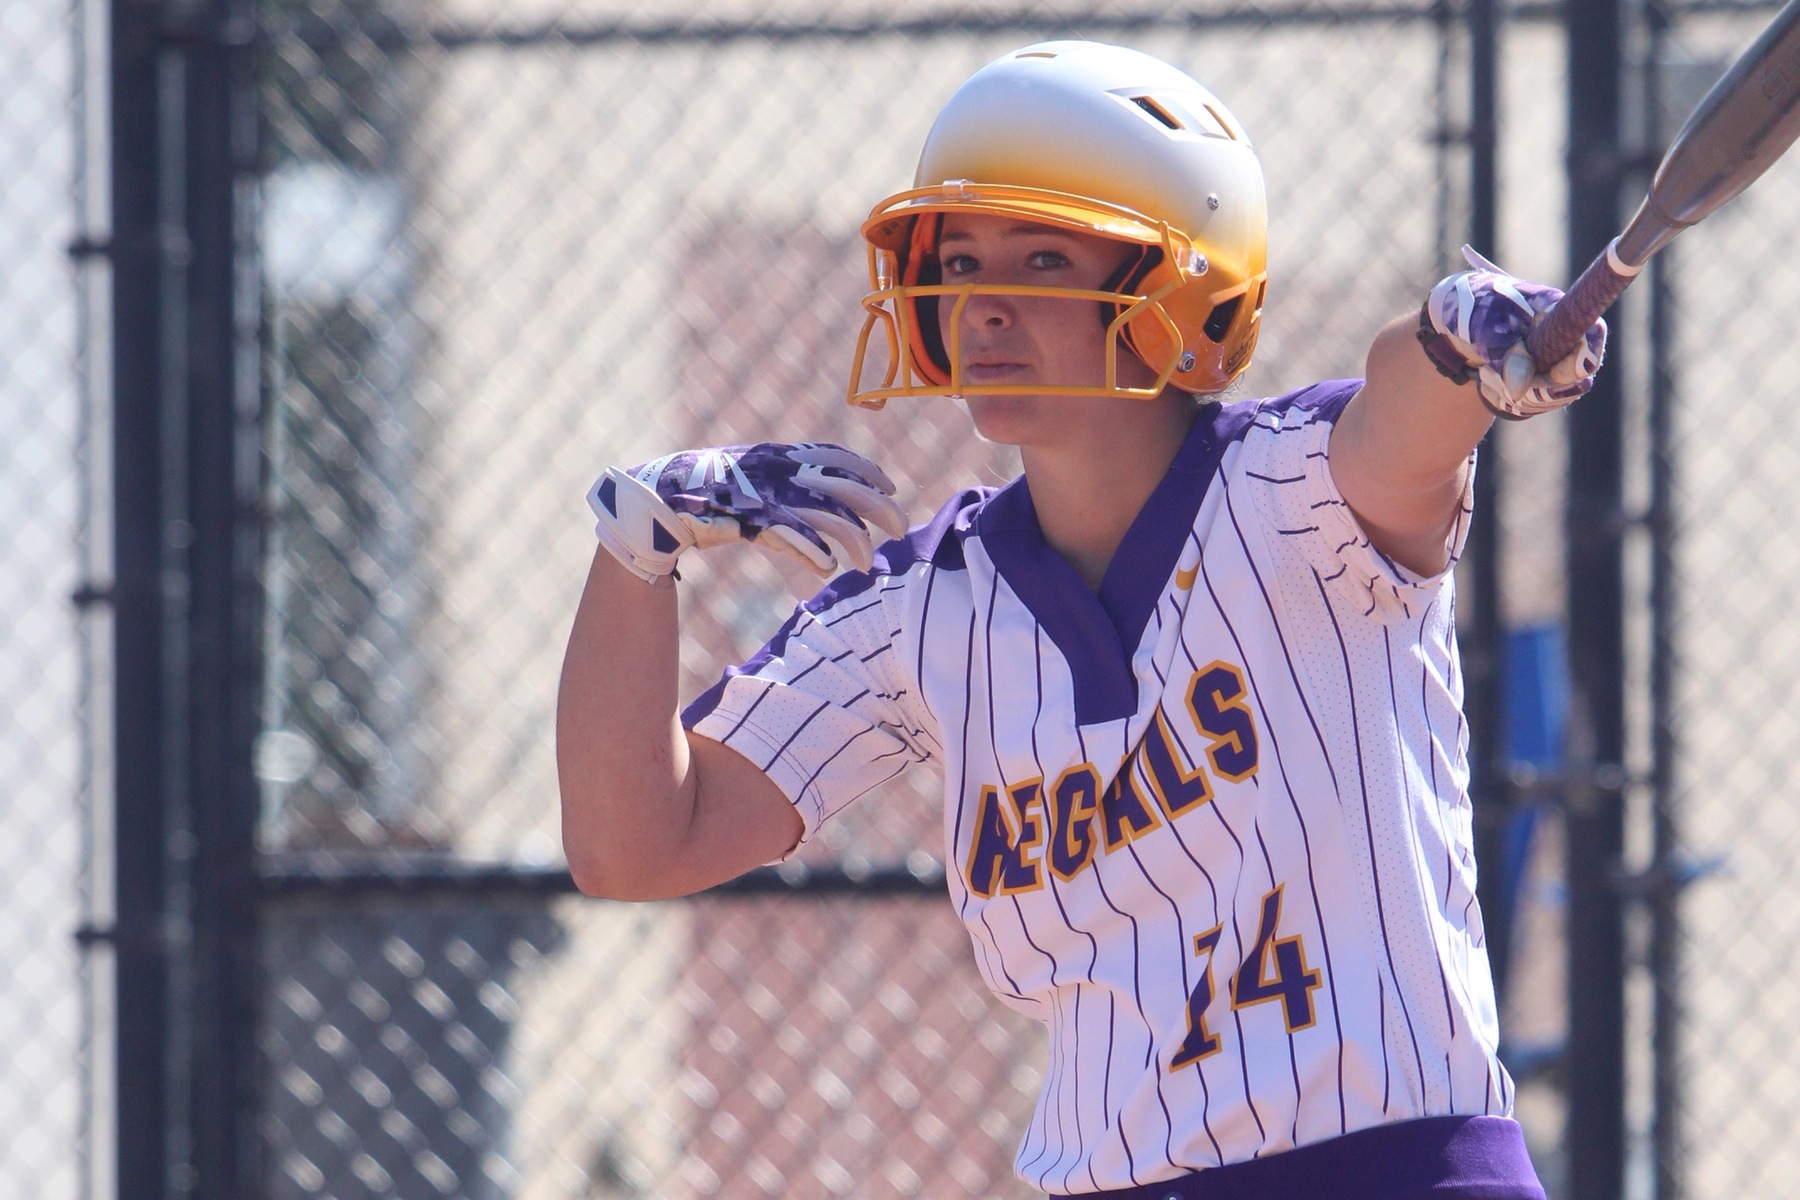 Catherine Slabaugh comes up with a clutch RBI single to CLU a 7-6 win against Whittier. (Photo: Danielle Roumbos)